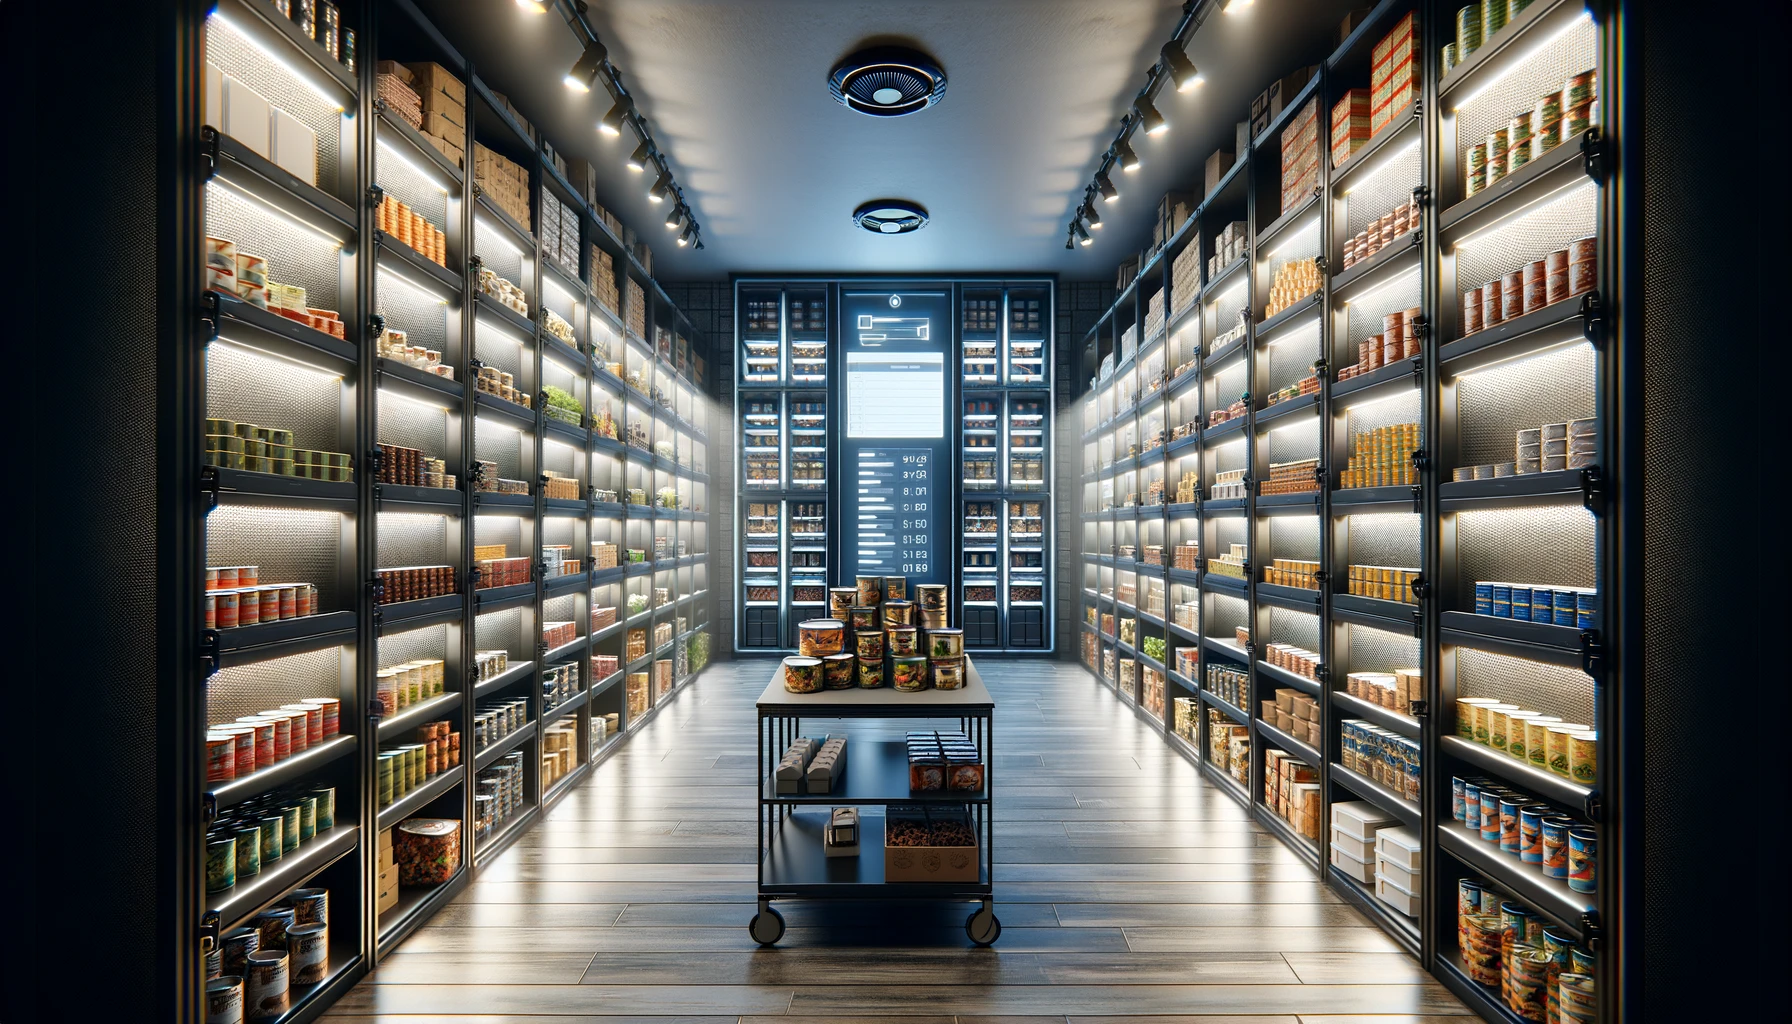 Large modern pantry room with floor-to-ceiling shelves organized with canned goods and freeze-dried food packets, featuring clear labeling, LED spotlights, and a central aisle for easy navigation, complemented by a smart inventory system on a digital screen, embodying efficiency and accessibility for preppers